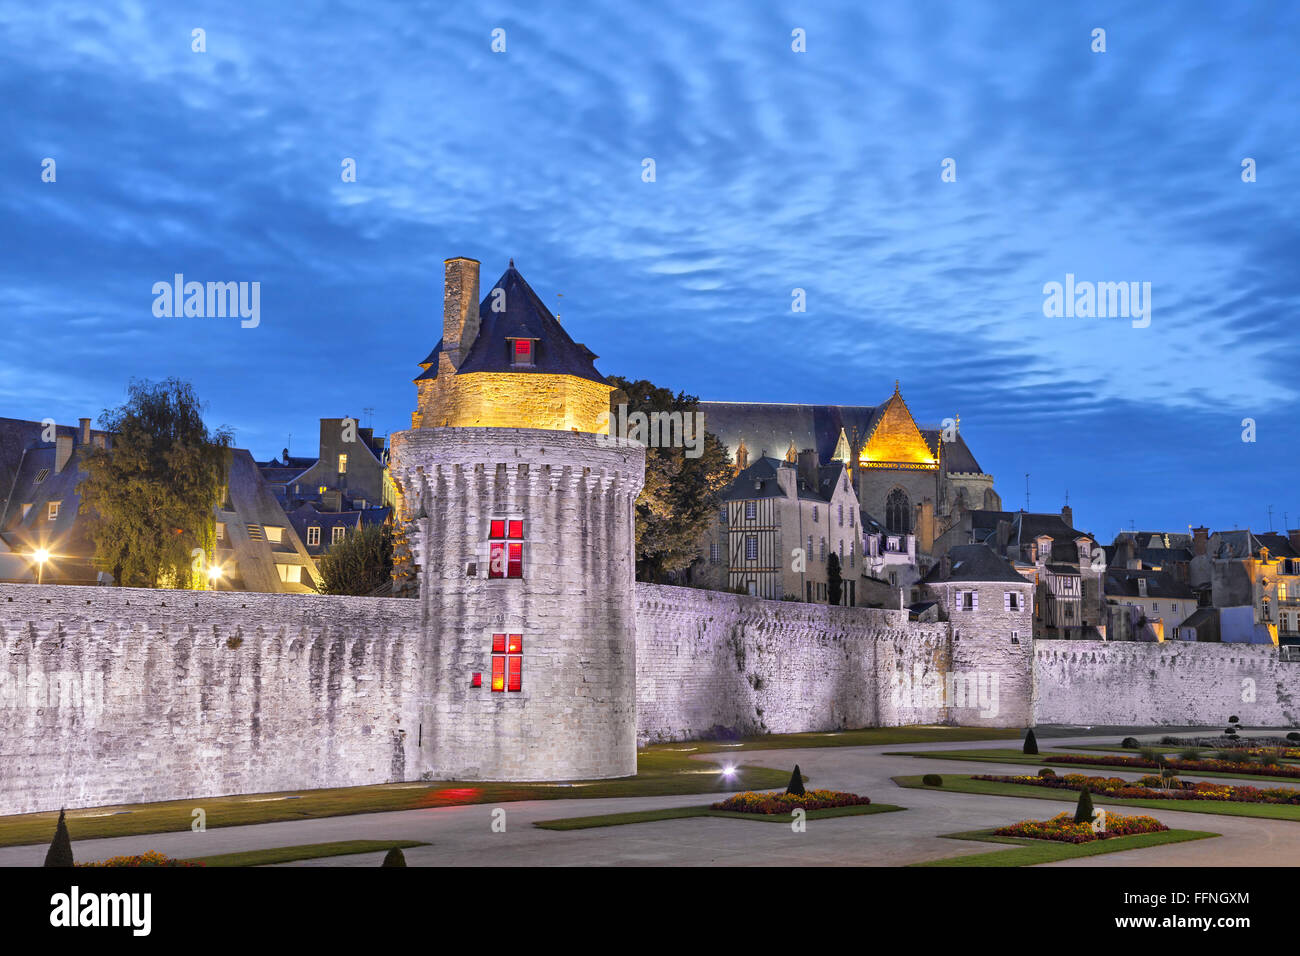 Medieval wall in historical city Vannes, Brittany, France Stock Photo